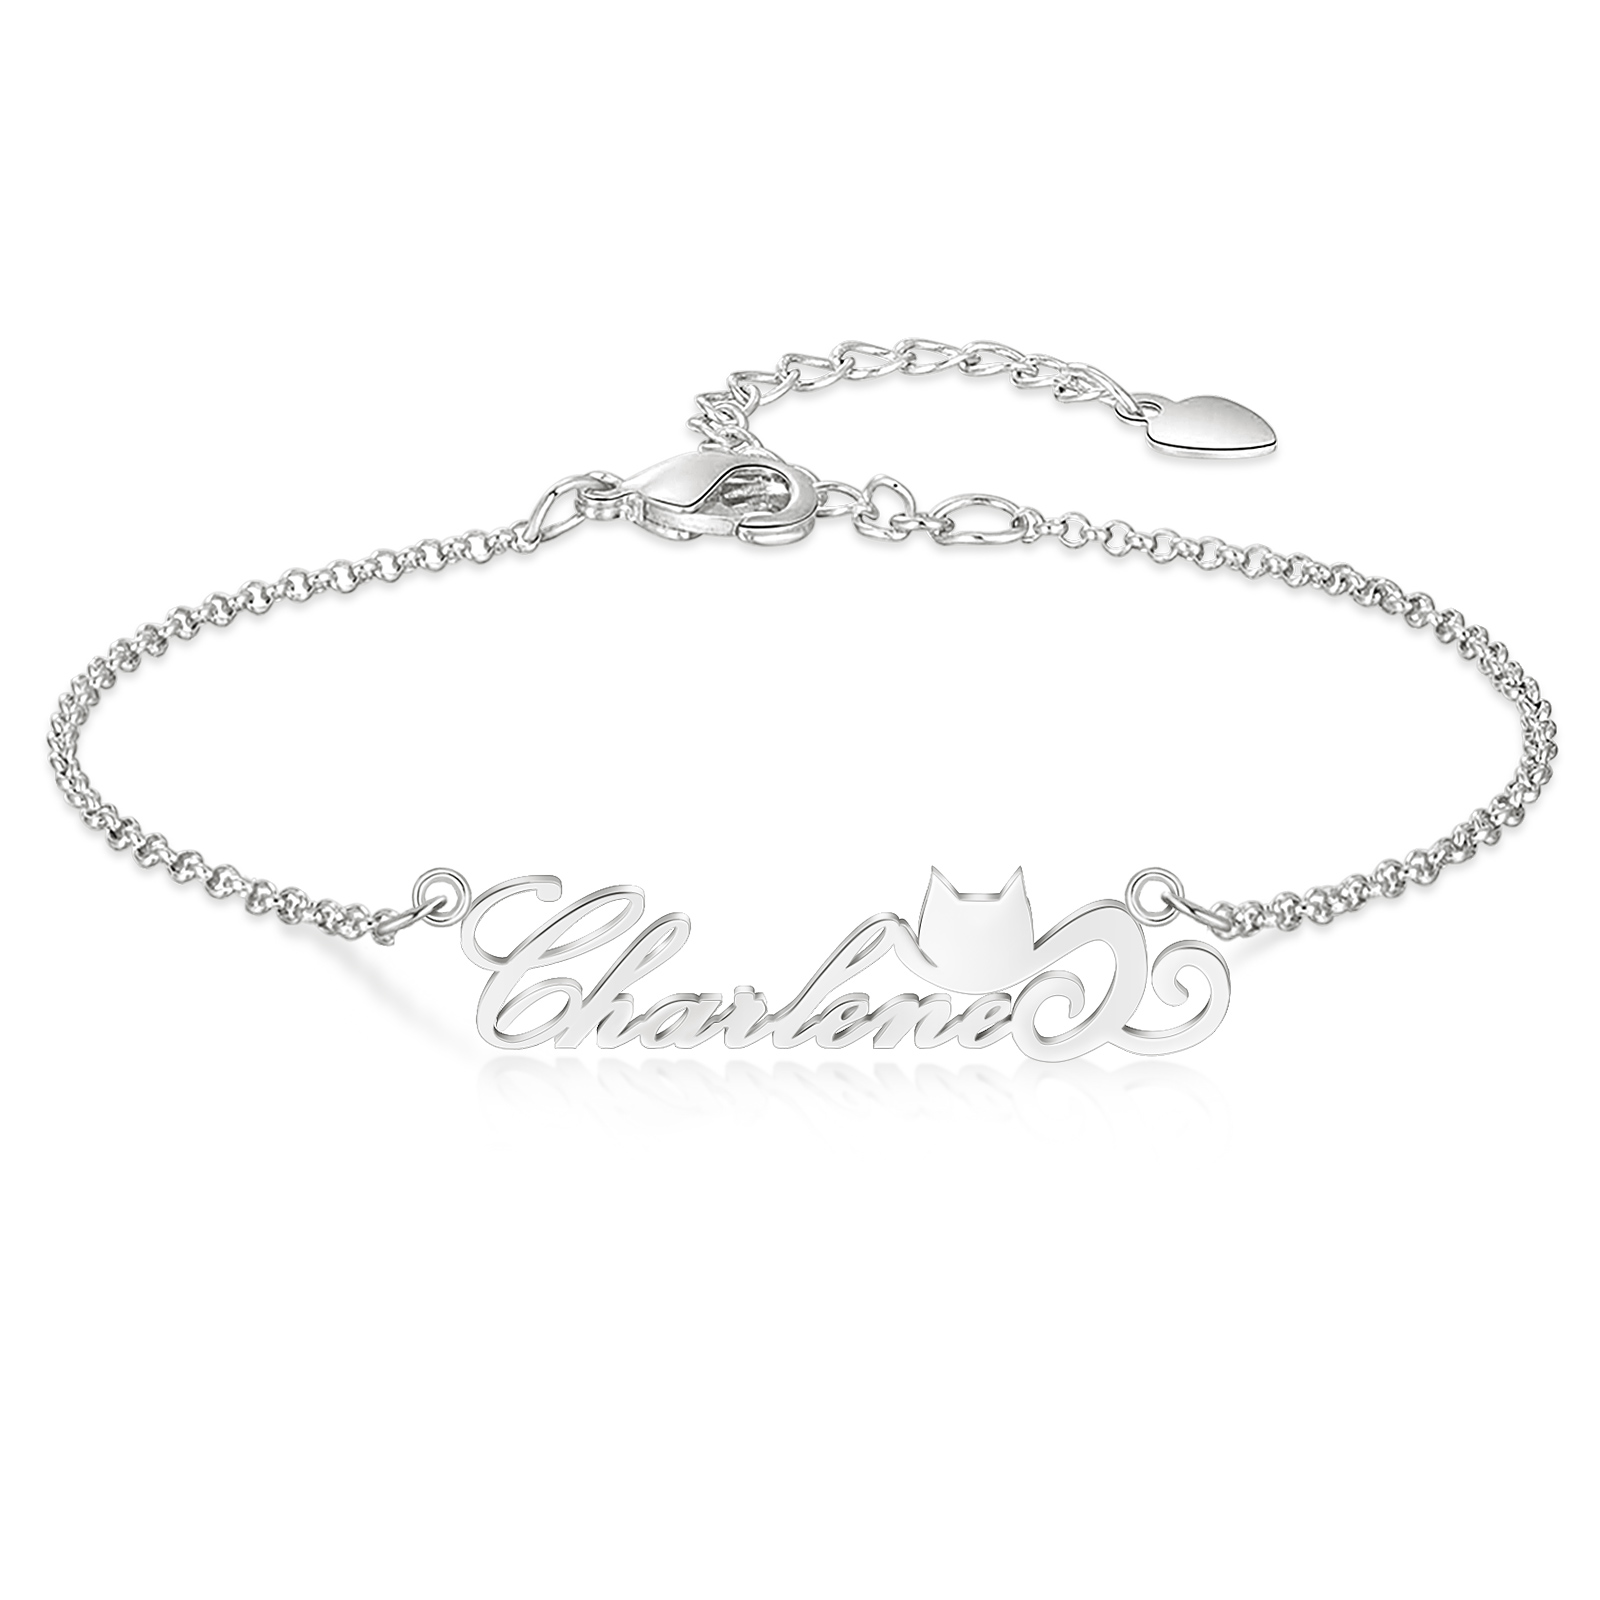 Personalized Engraved Name Bracelet with Cat Avatar for Her